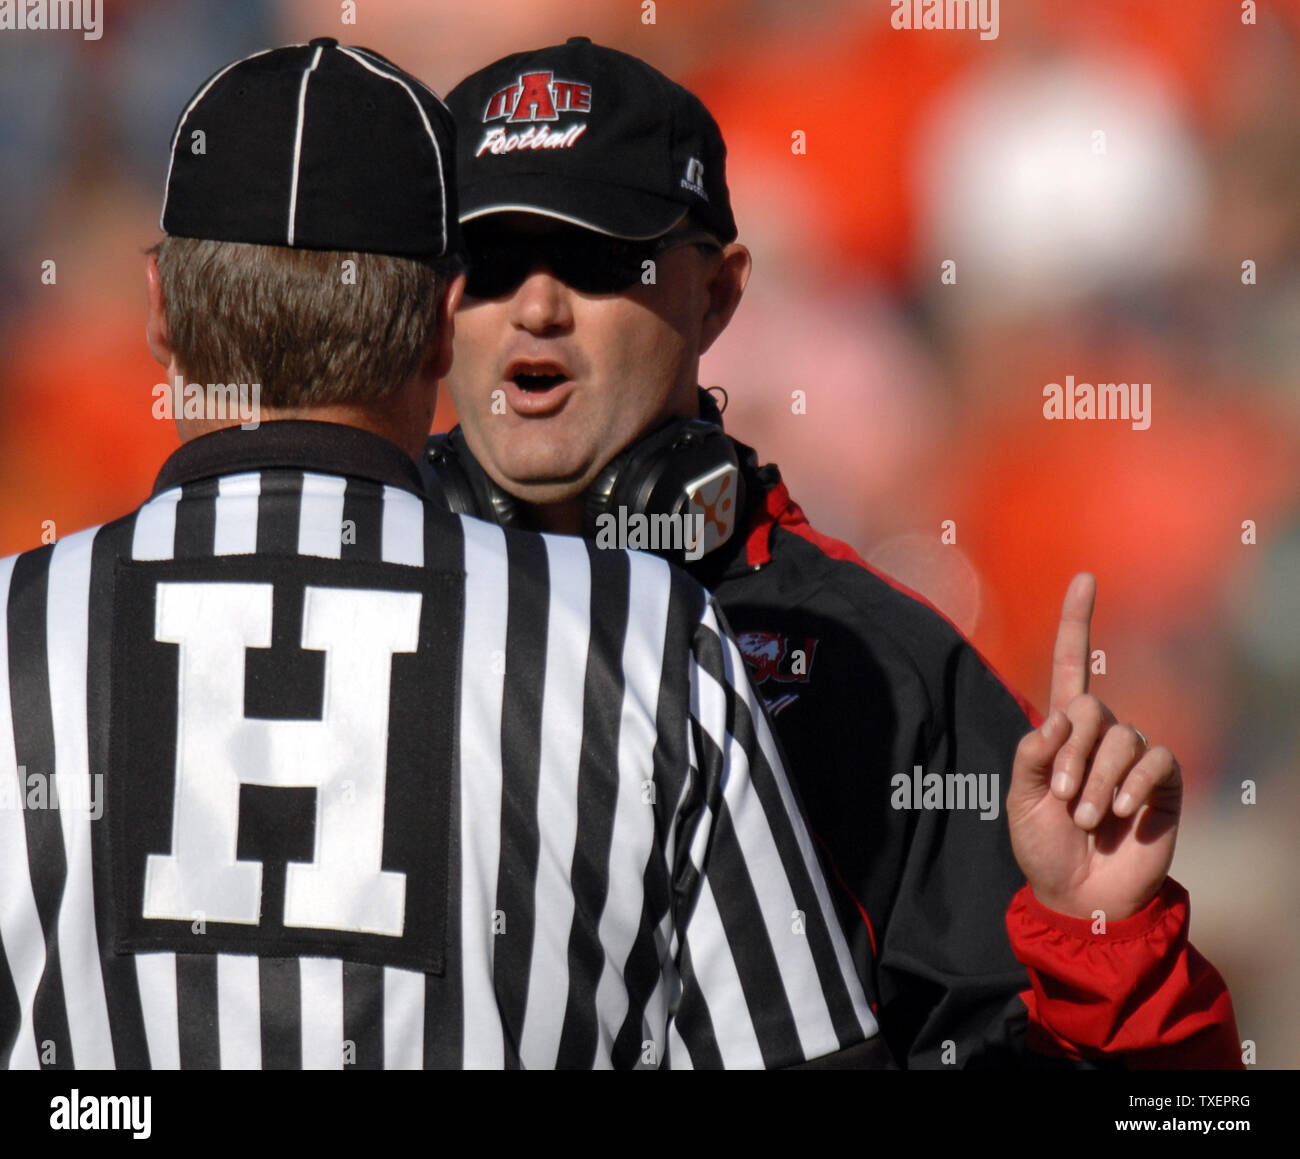 Arkansas State head coach Steve Roberts has a conversation with linesman Johnny Crawford during a time-out in the game against Auburn in the second quarter at Jordan-Hare Stadium in Auburn, Alabama on November 4, 2006. Auburn shut out Arkansas State 27-0. (UPI Photo/John Dickerson) Stock Photo